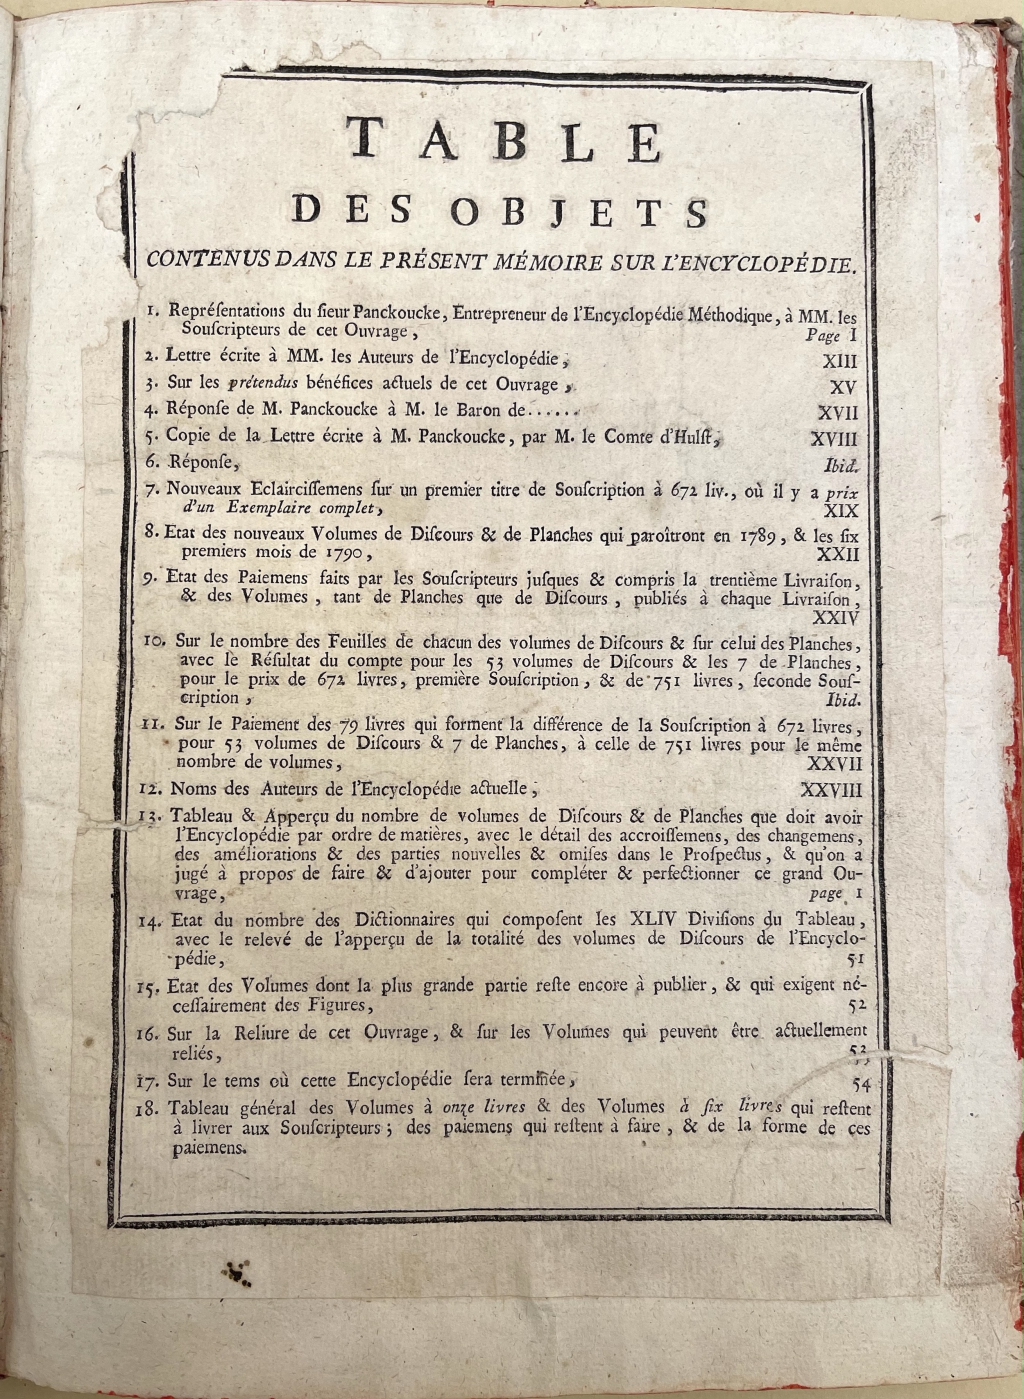 The first page of the Prospectus was a listing of the titles of various sections. Notice that this page was damaged and mounted on another leaf at an early date.